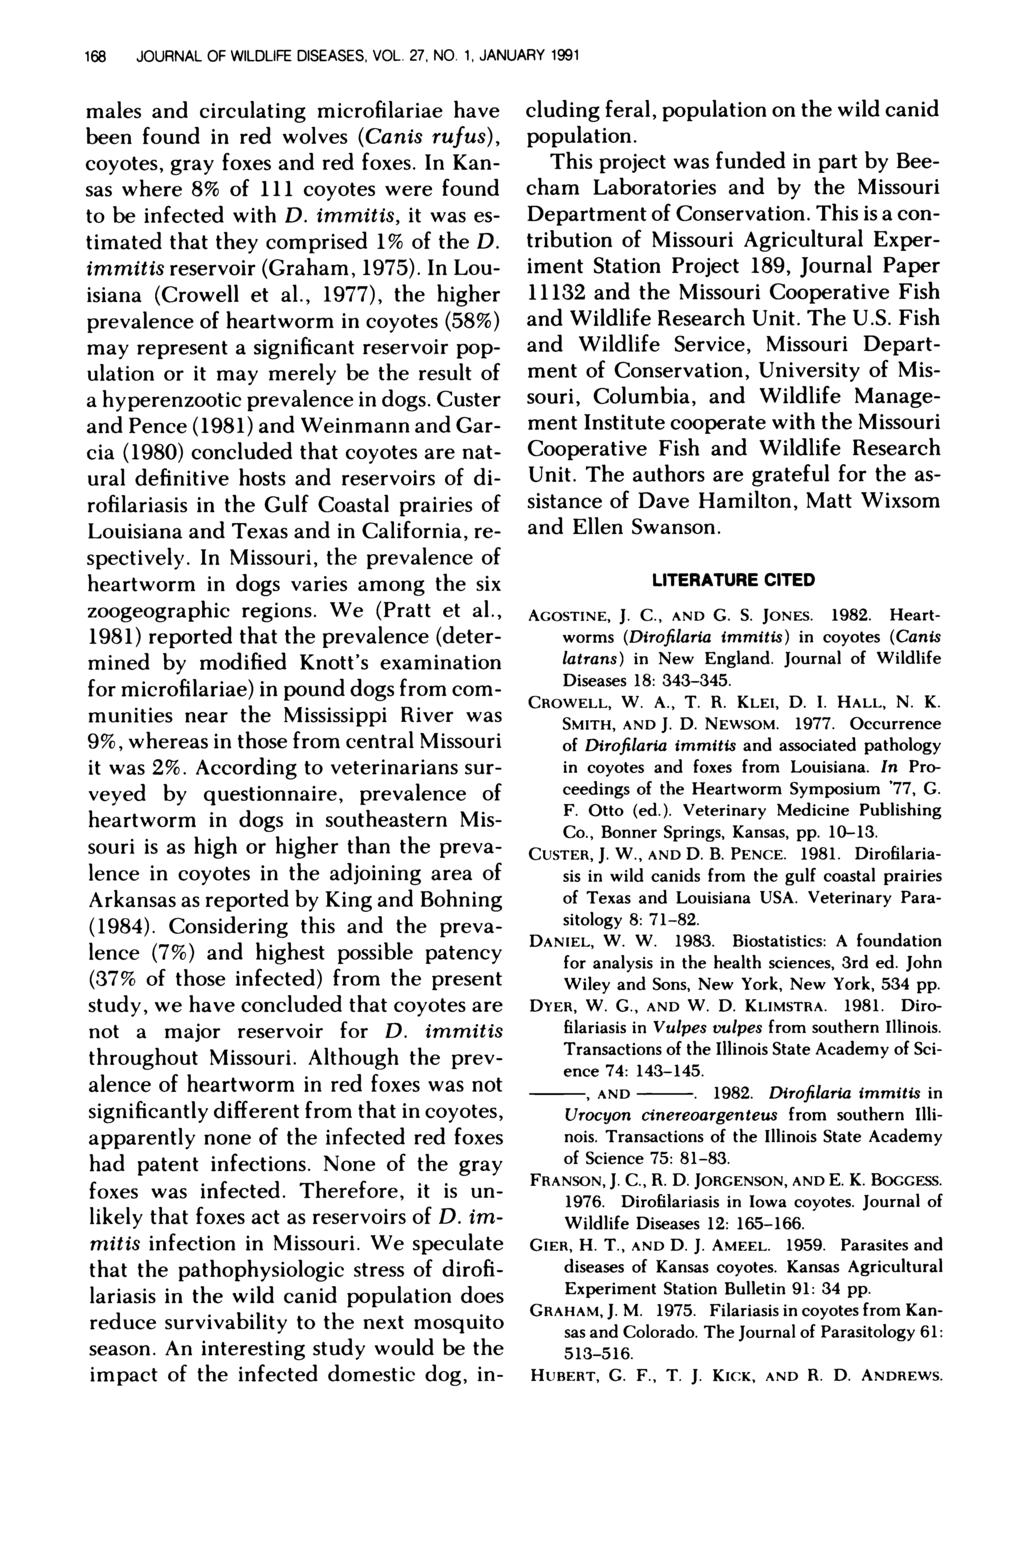 168 JOURNAL OF WILDLIFE DISEASES, VOL. 27. NO. 1, JANUARY 1991 males and circulating microfilariae have been found in red wolves (Canis rufus), coyotes, gray foxes and red foxes.